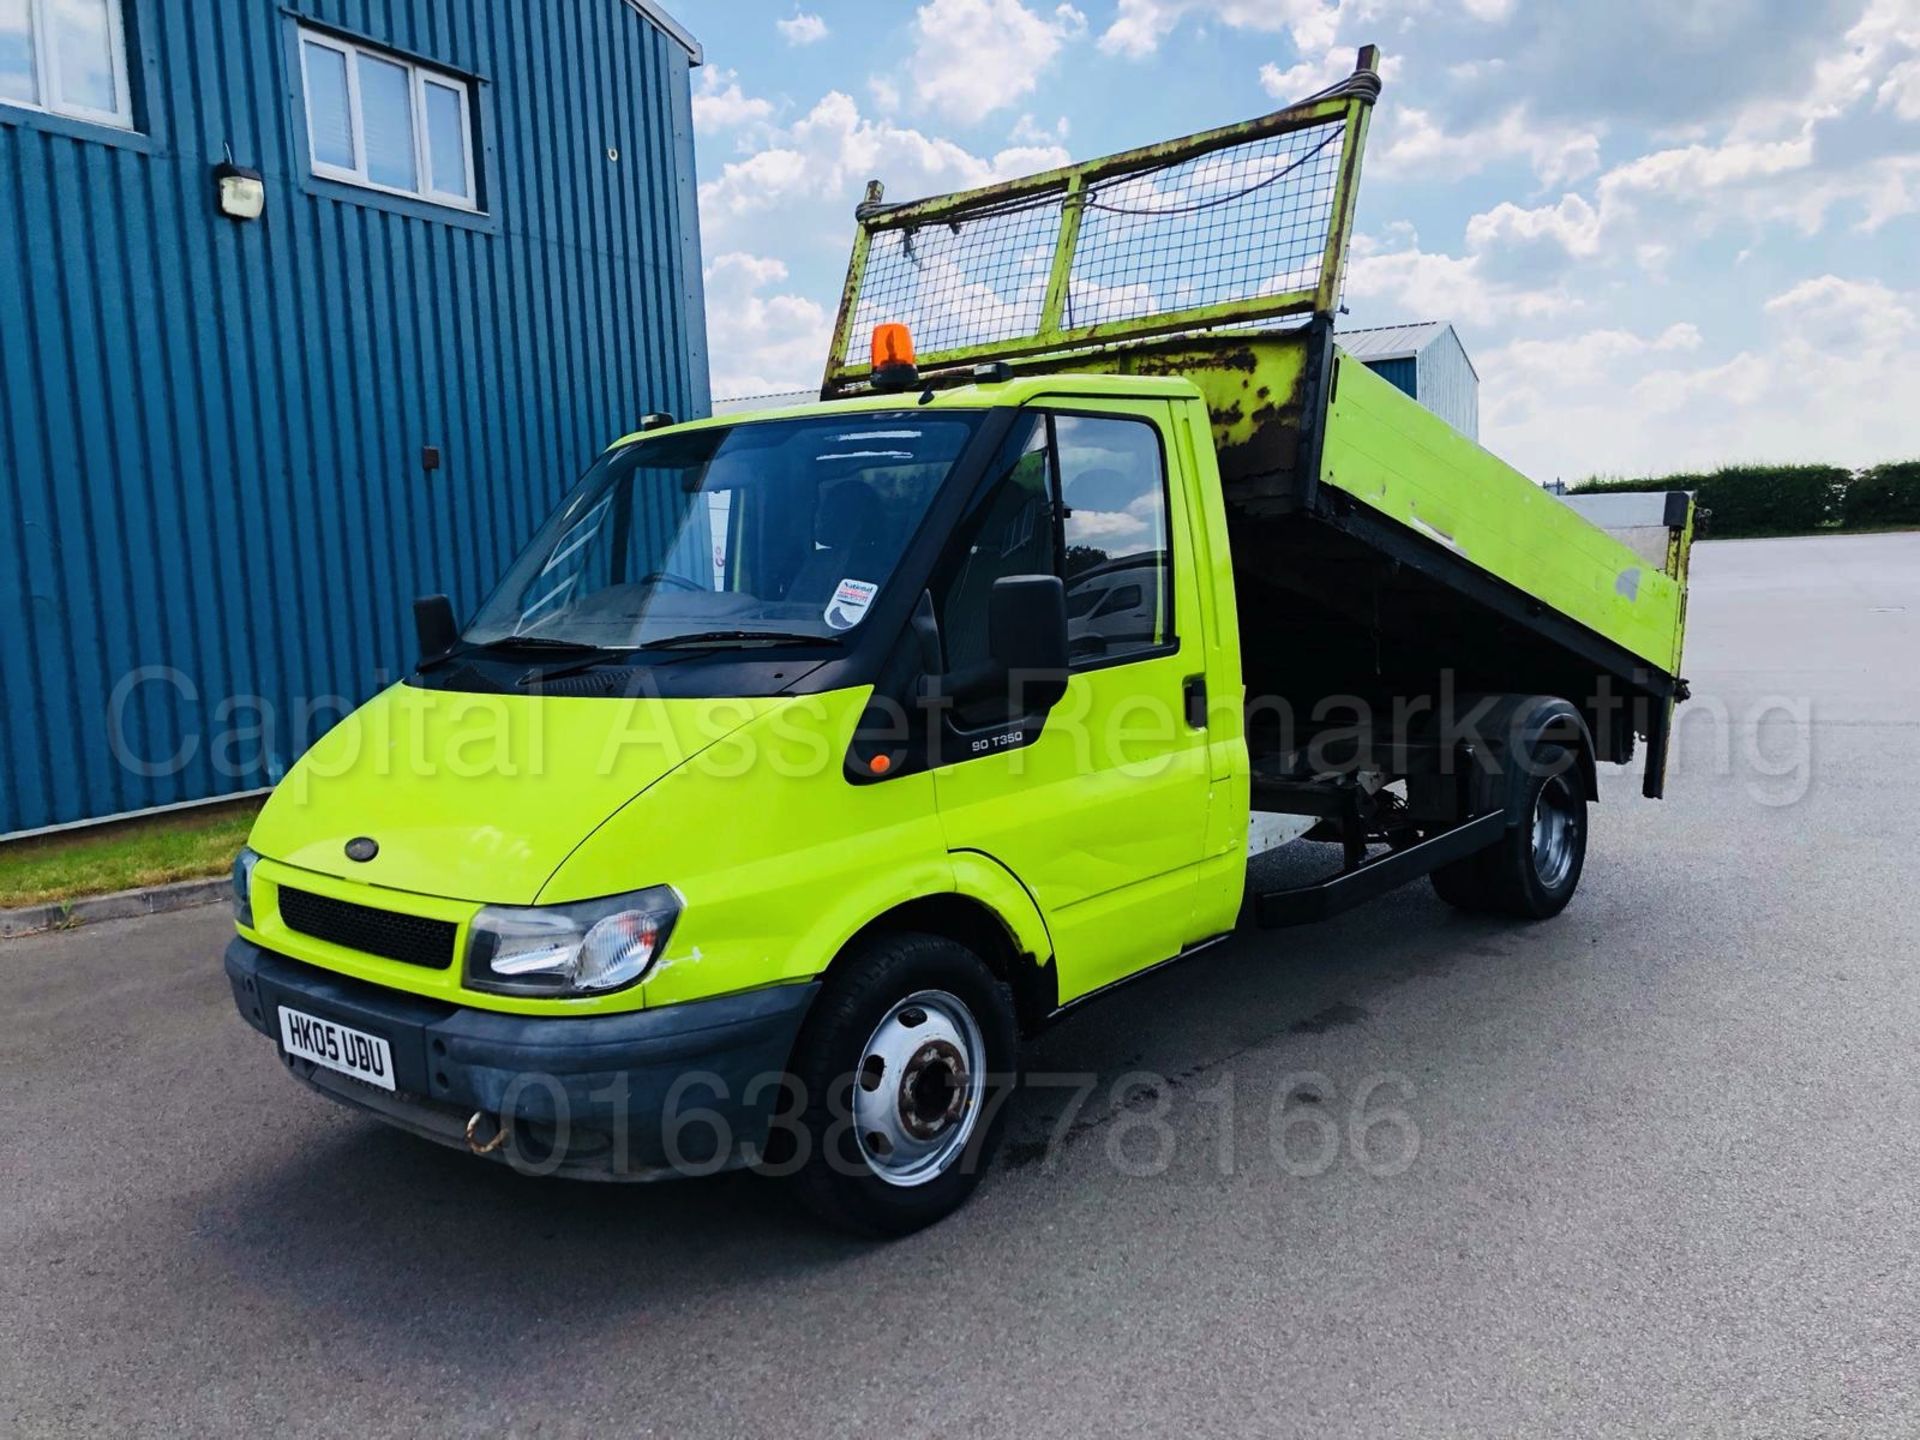 (On Sale) FORD TRANSIT 90 T350 'SINGLE CAB - TIPPER' (2005) '2.4 TDCI -90 BHP - 5 SPEED' *LOW MILES* - Image 5 of 20